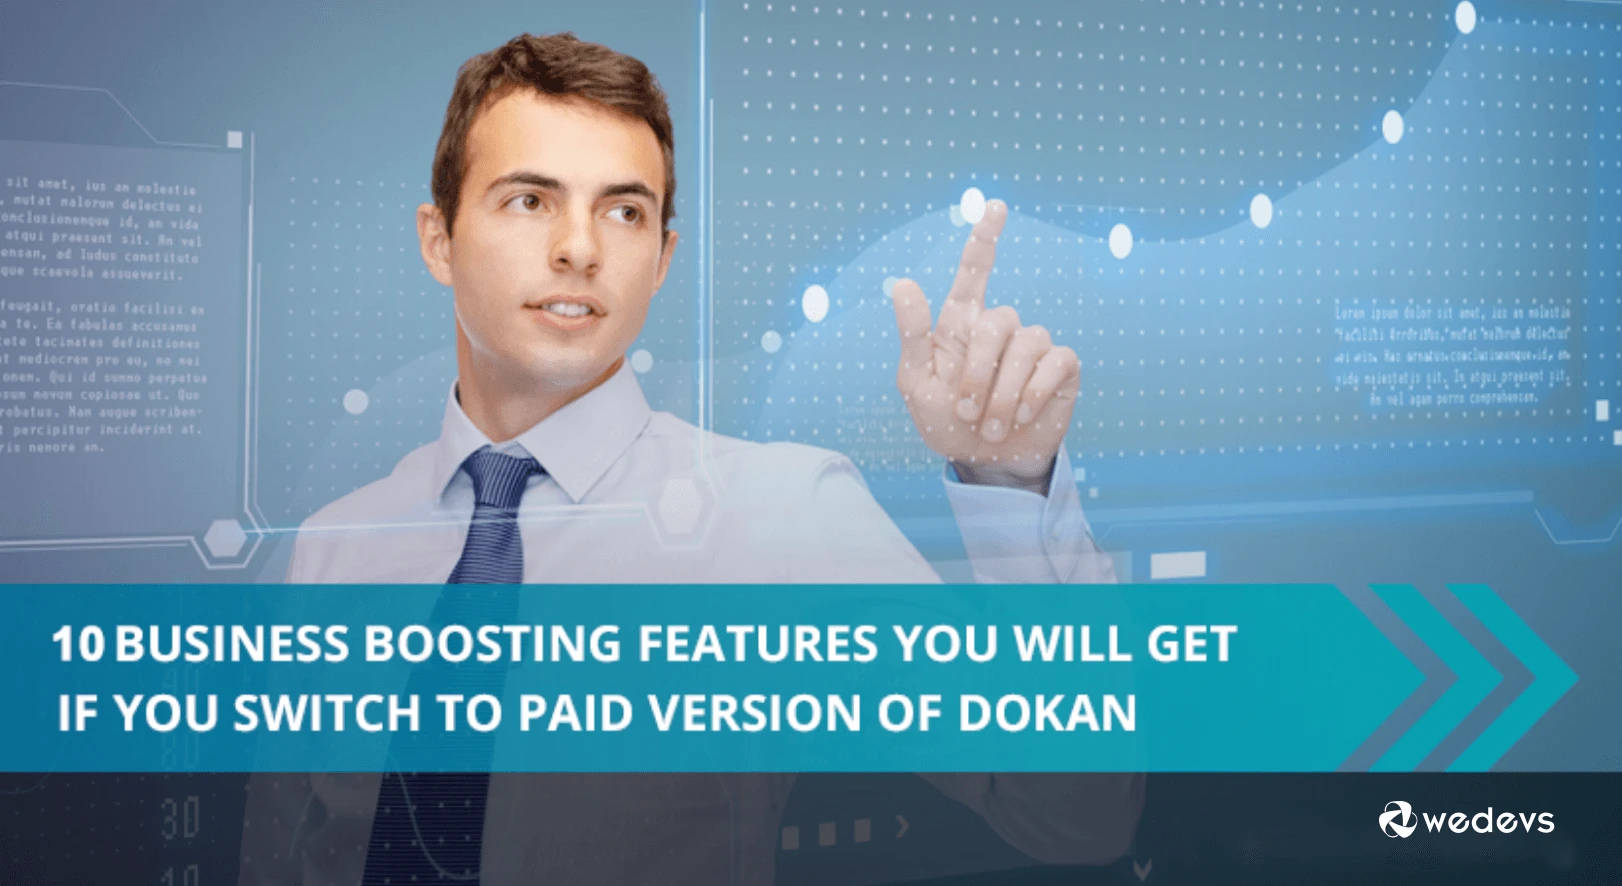 10 Business Boosting Features You Will Get If You Switch To Paid Version of Dokan